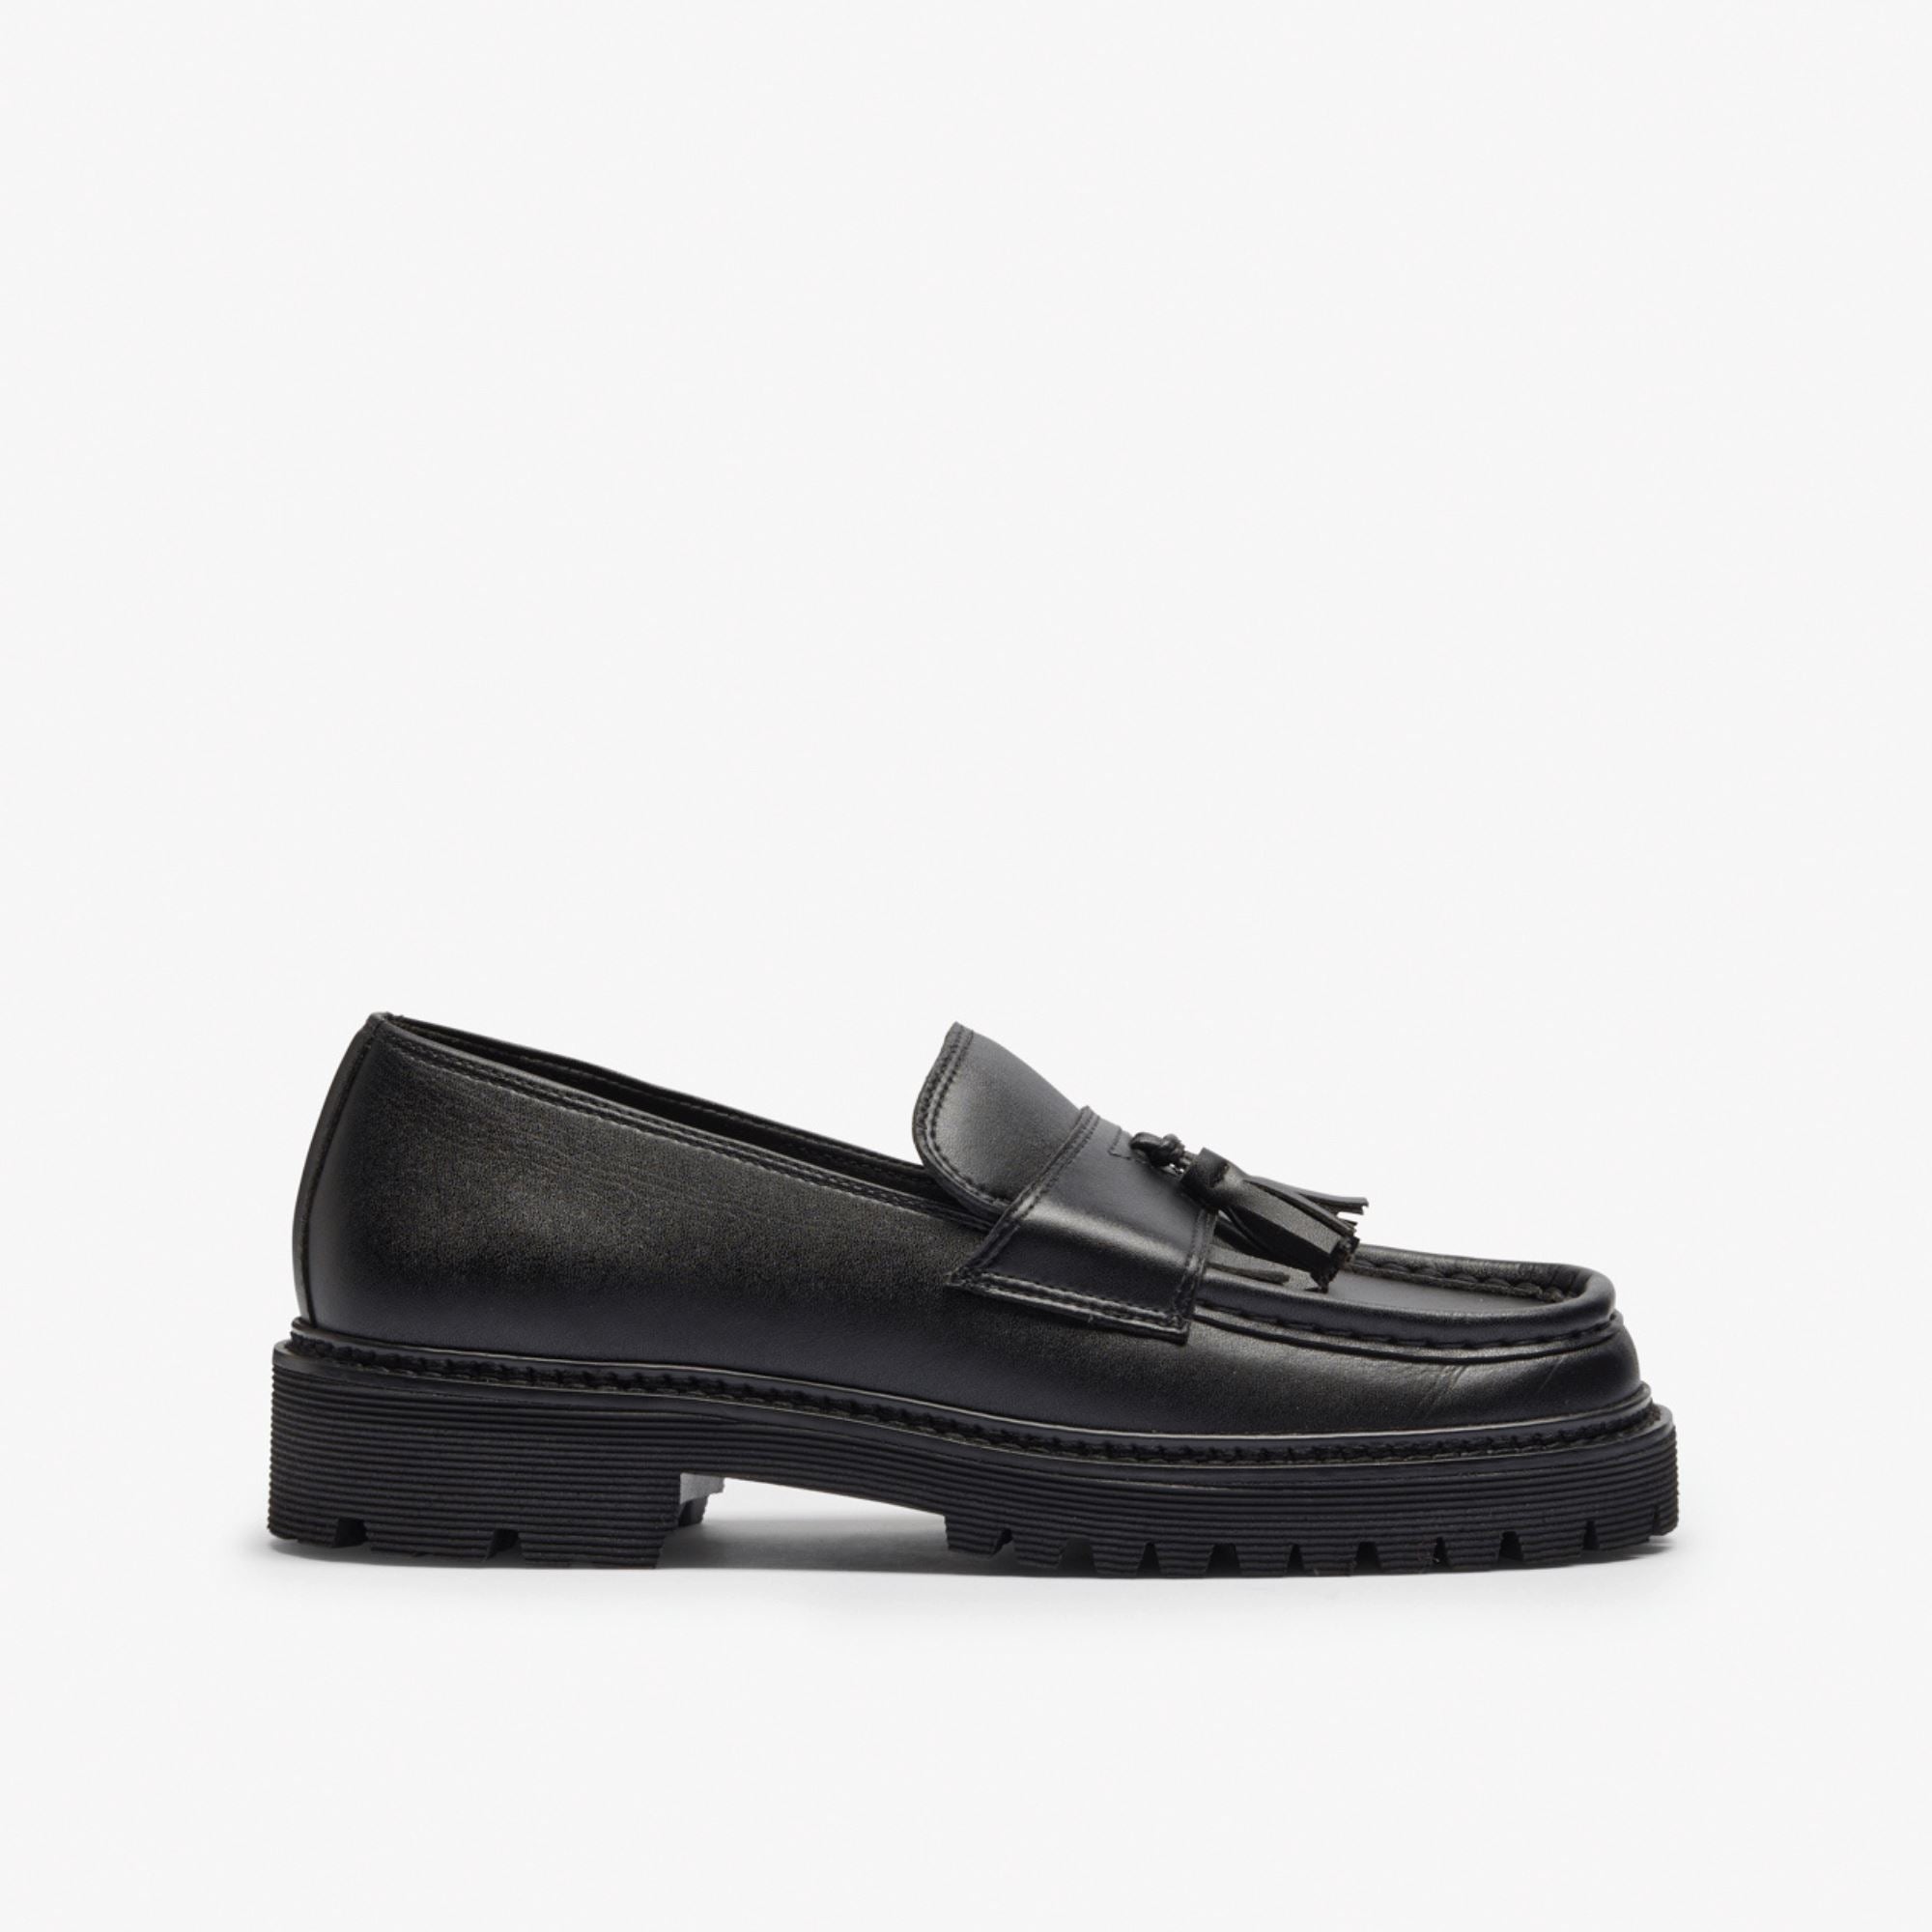 The Noskin Mater Loafer